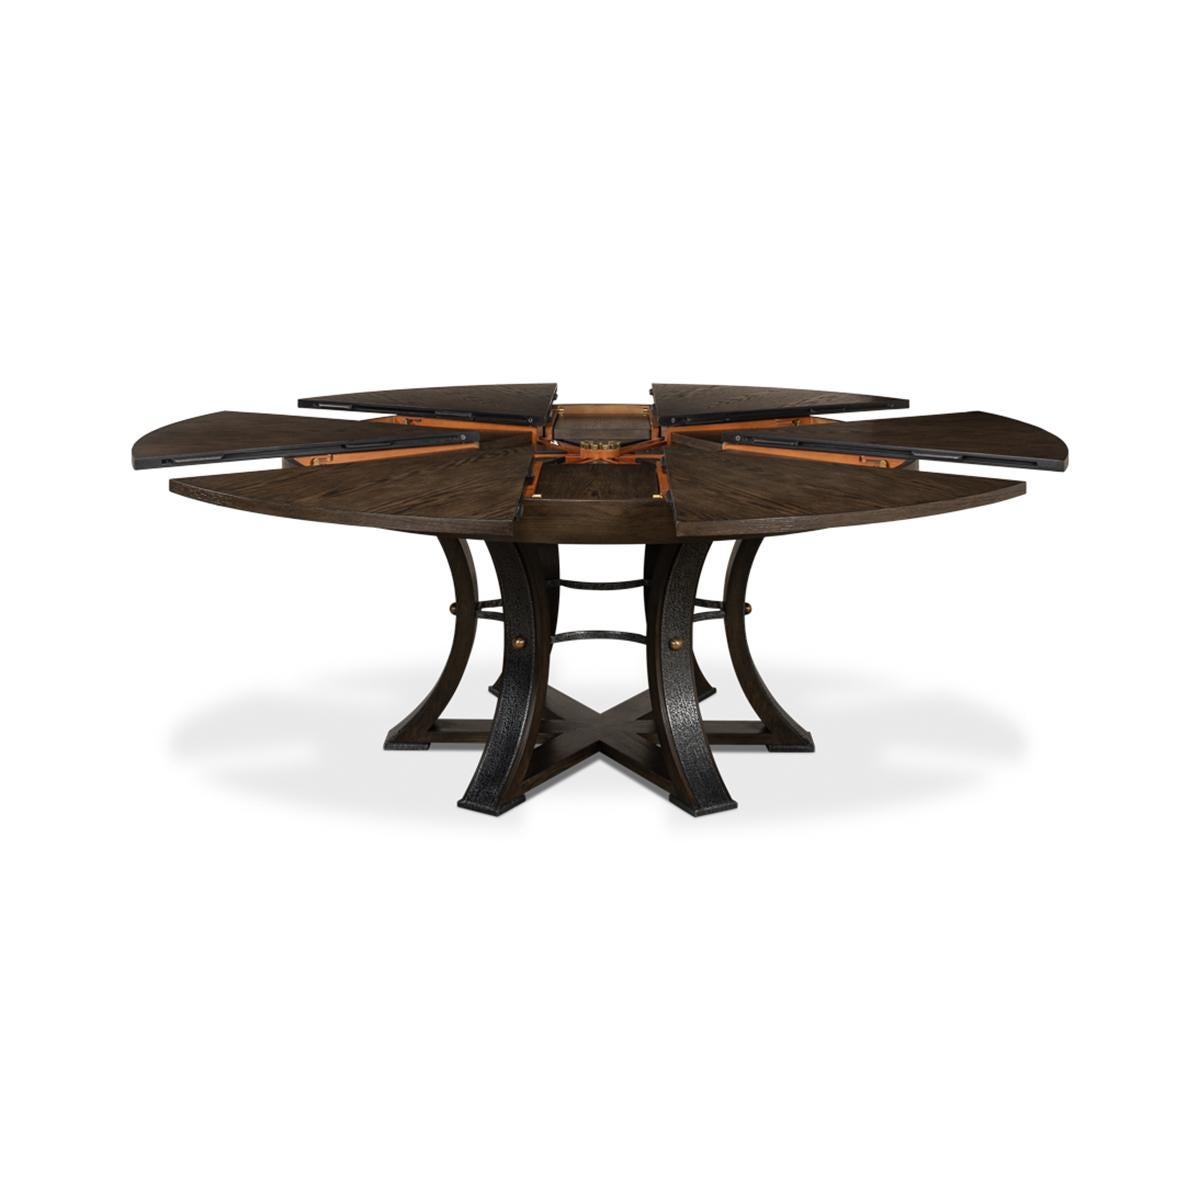 Vietnamese Large Modern Industrial Dining Table - 84 For Sale